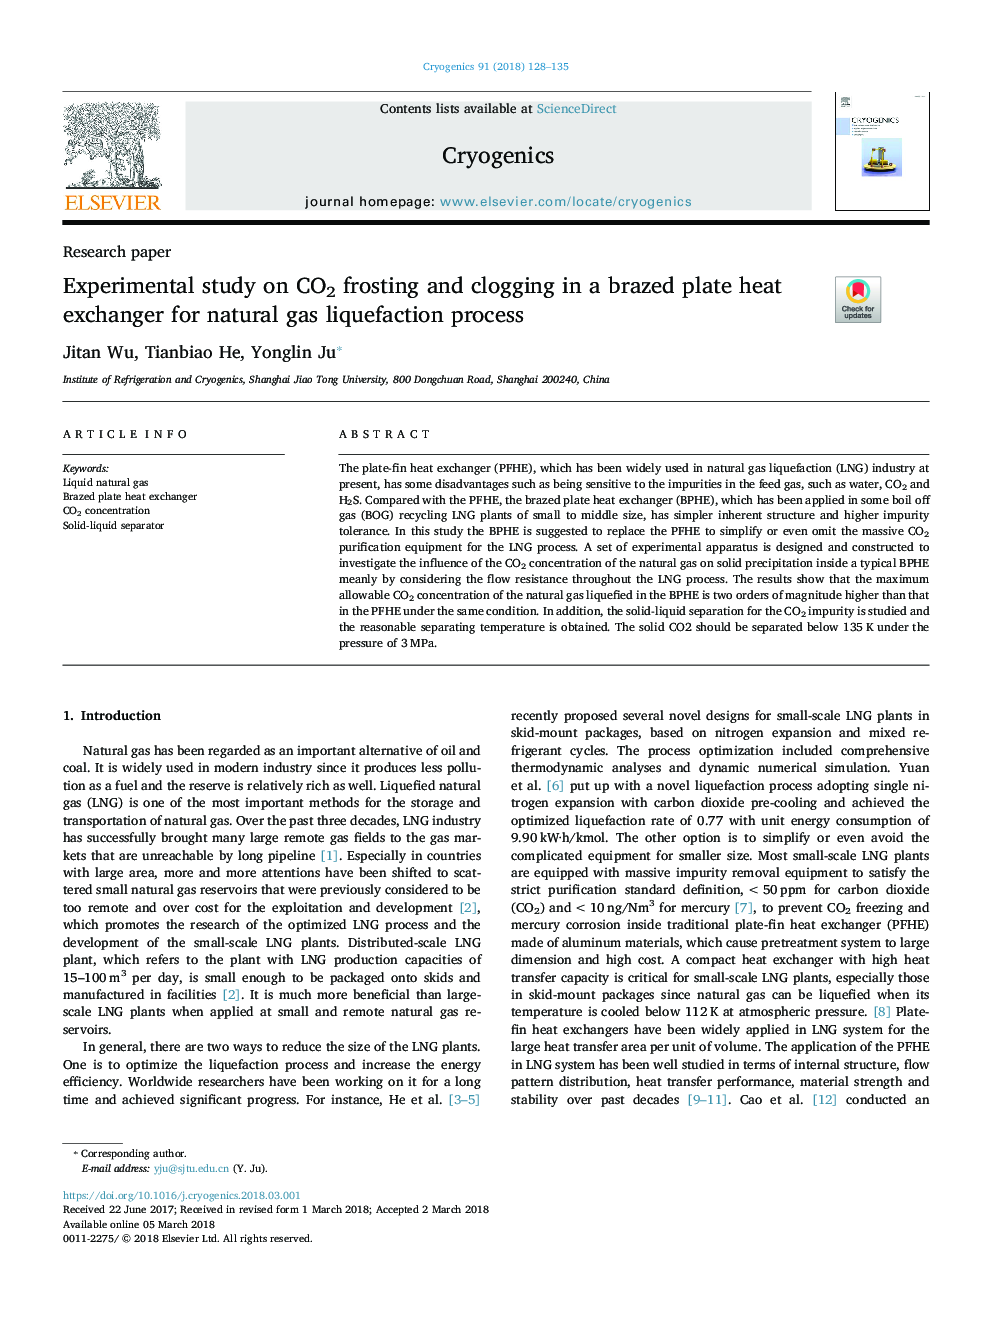 Experimental study on CO2 frosting and clogging in a brazed plate heat exchanger for natural gas liquefaction process